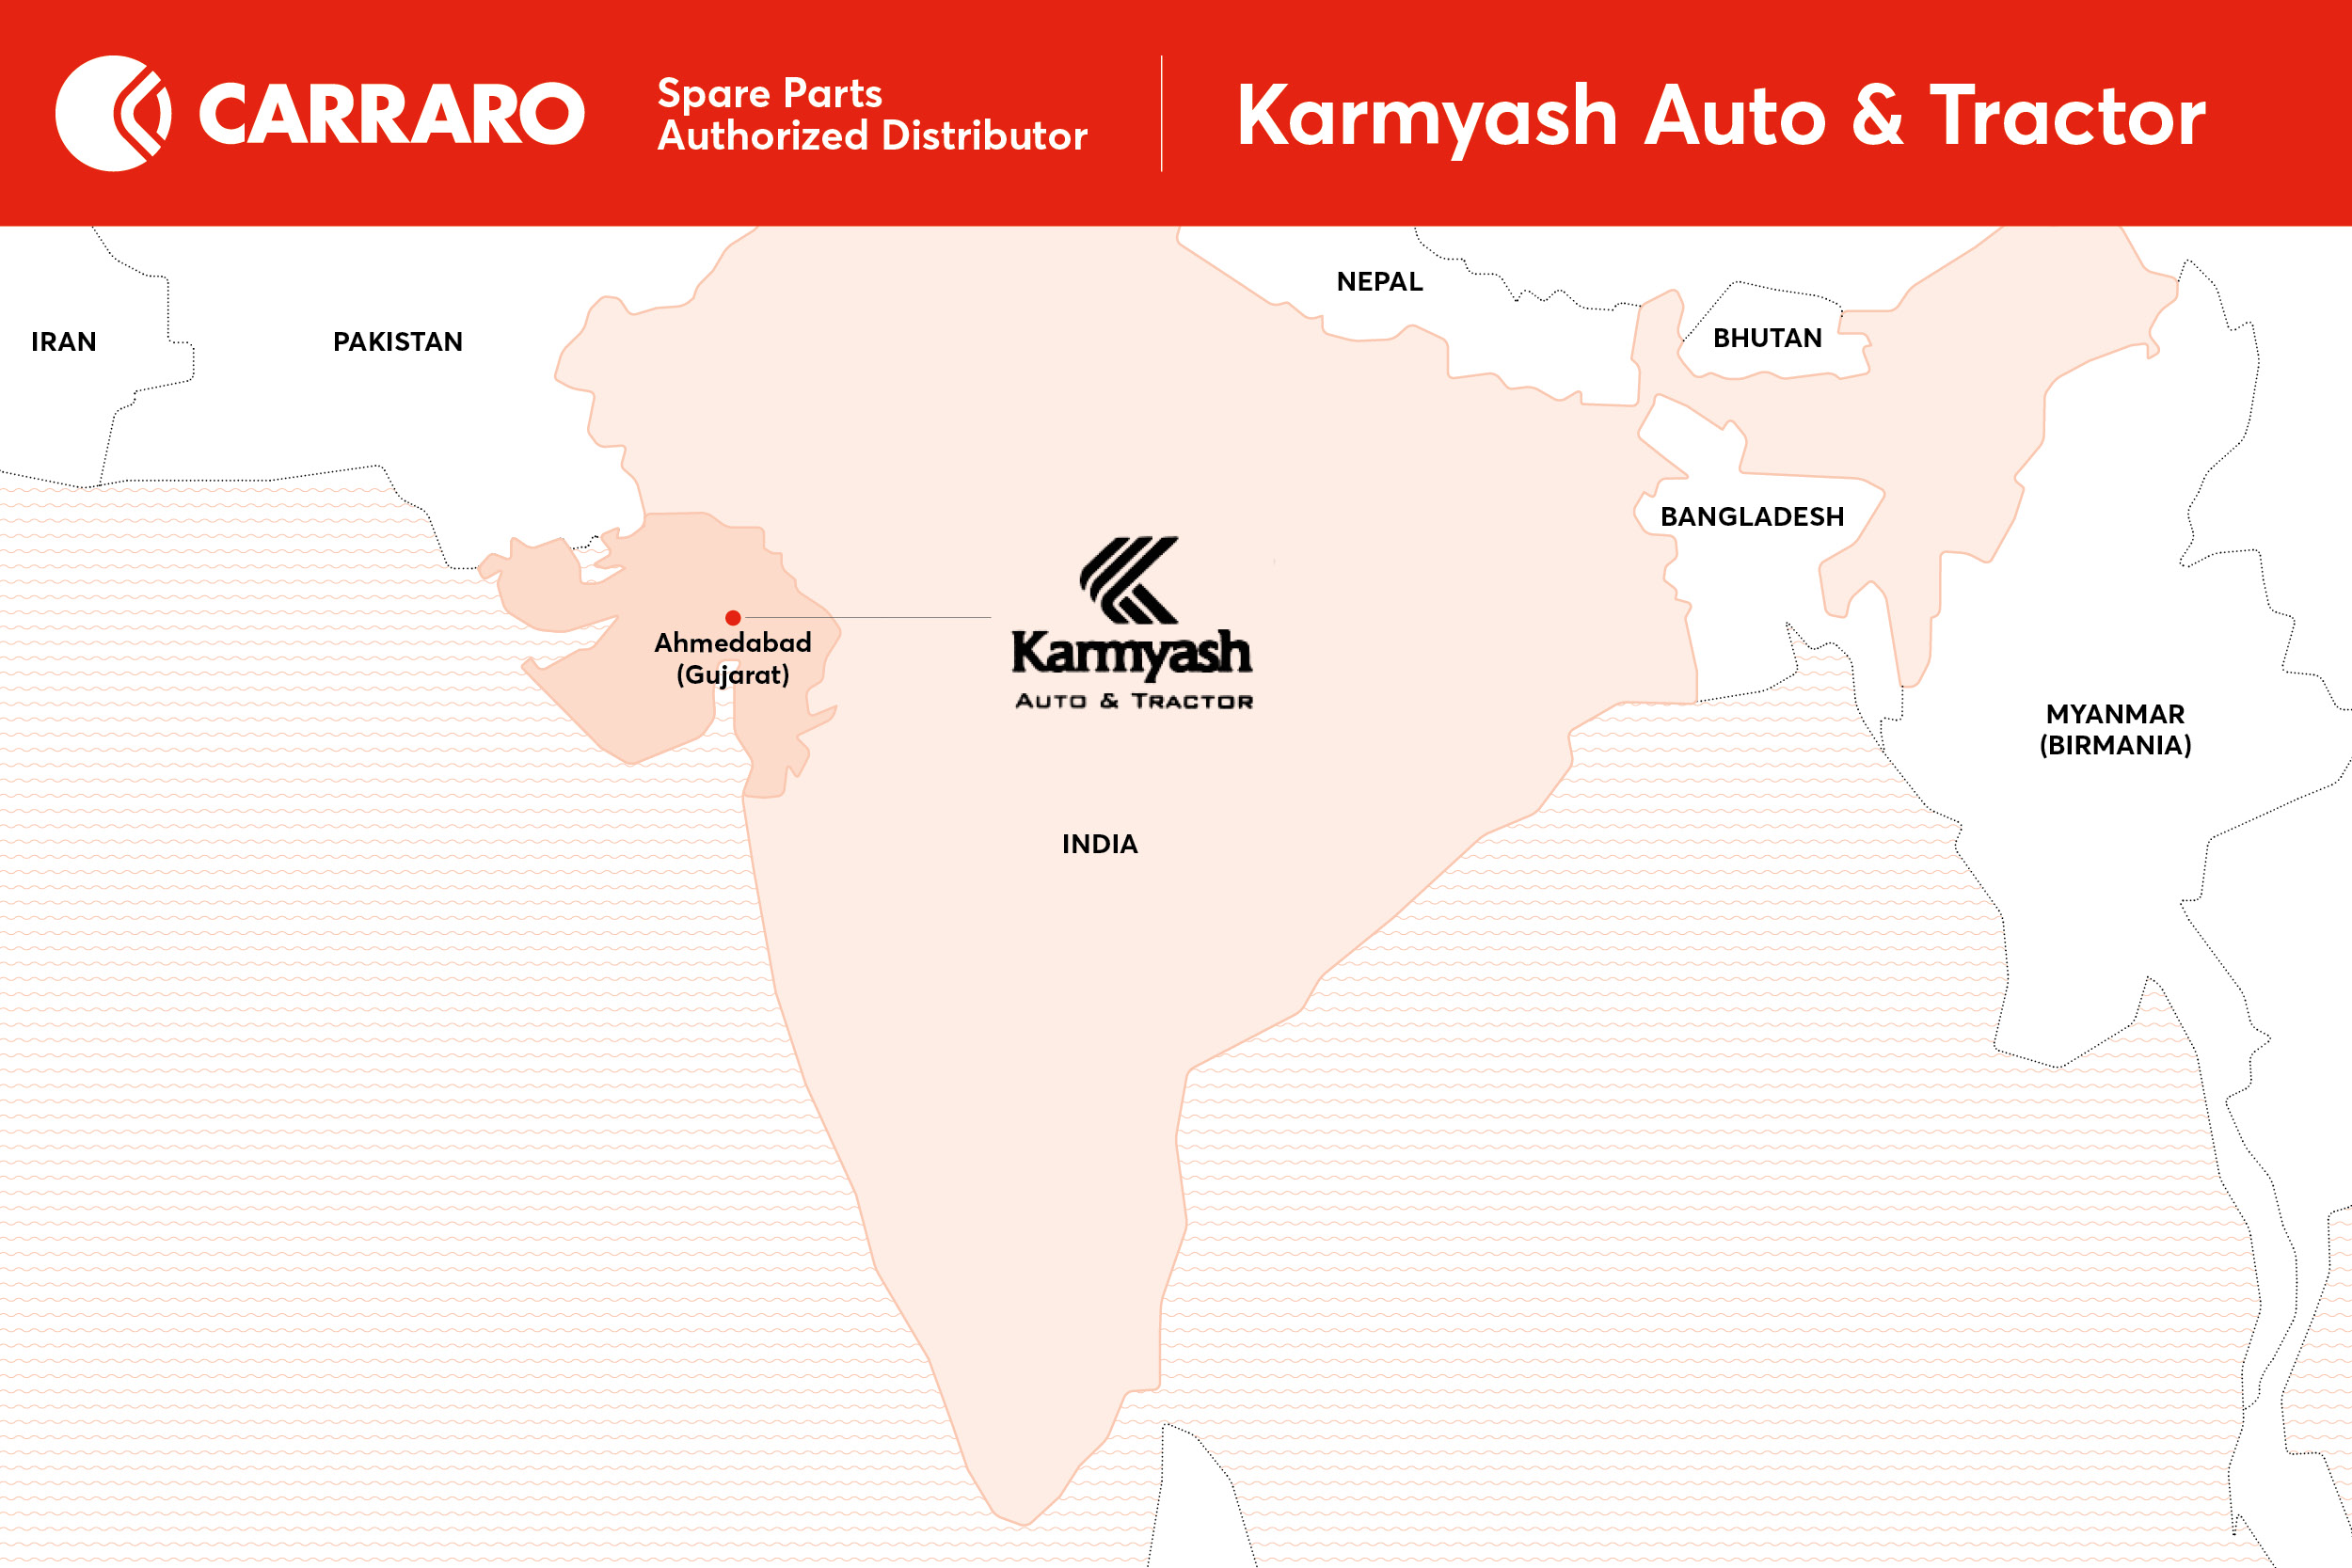 New Spare Partner in India: Karmyash Auto and Tractor!